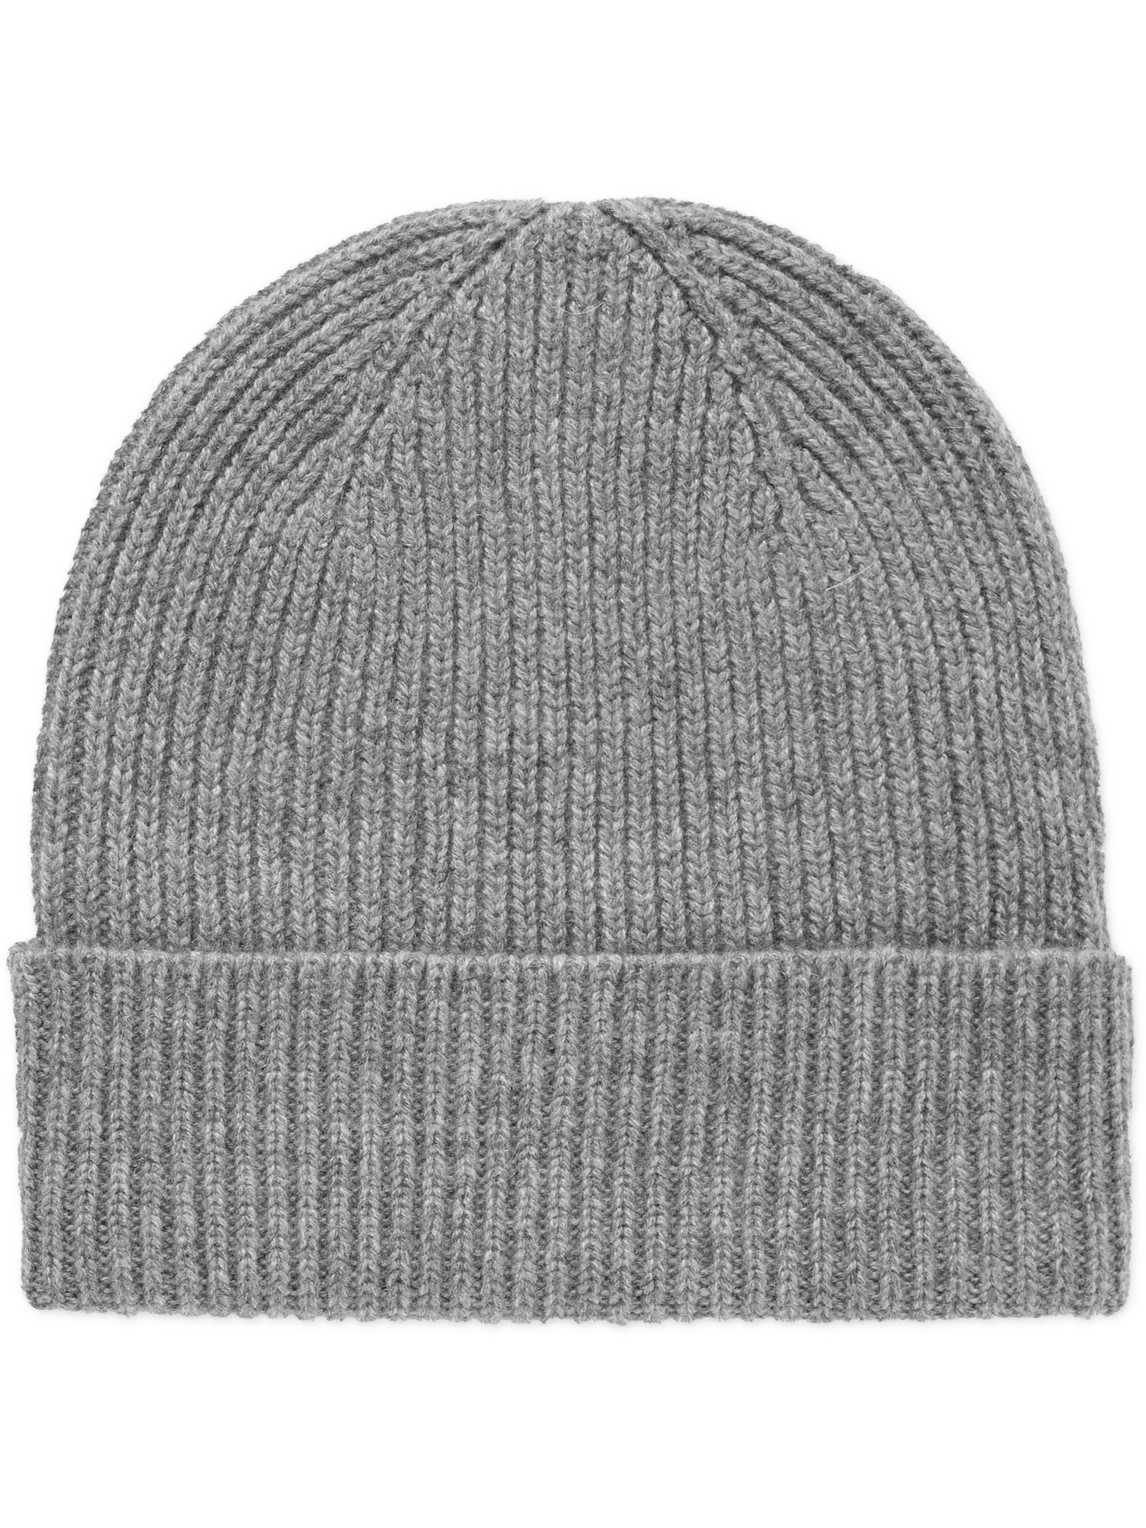 ANDERSON & SHEPPARD RIBBED CASHMERE BEANIE